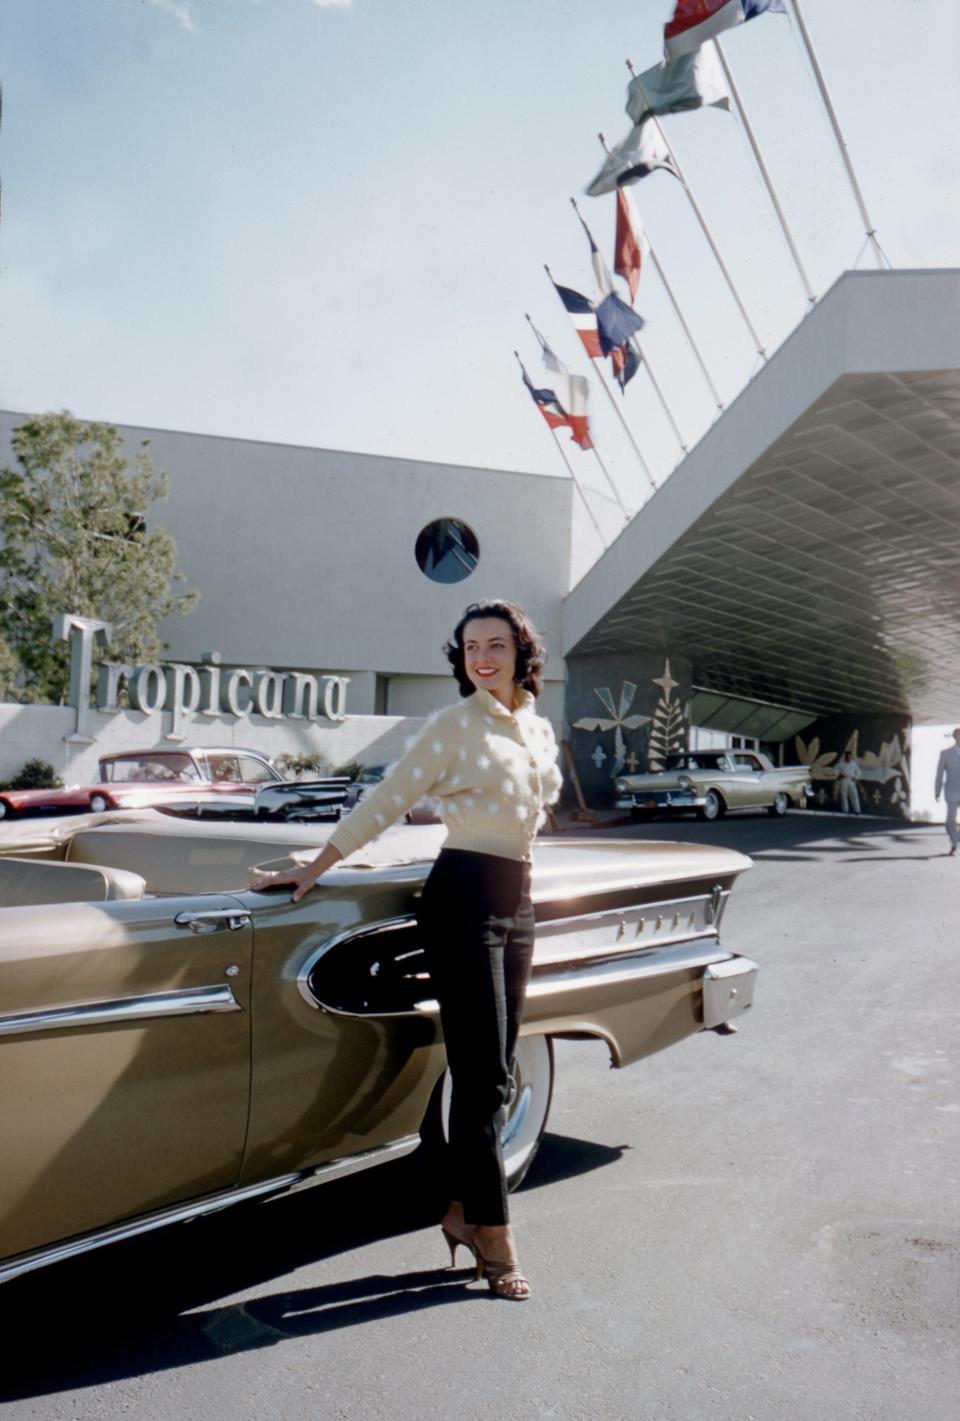 Actress and model Kitty Dolan poses next to a 1958 Ford Edsel Citation outside The Tropicana Hotel in 1958 in Las Vegas.